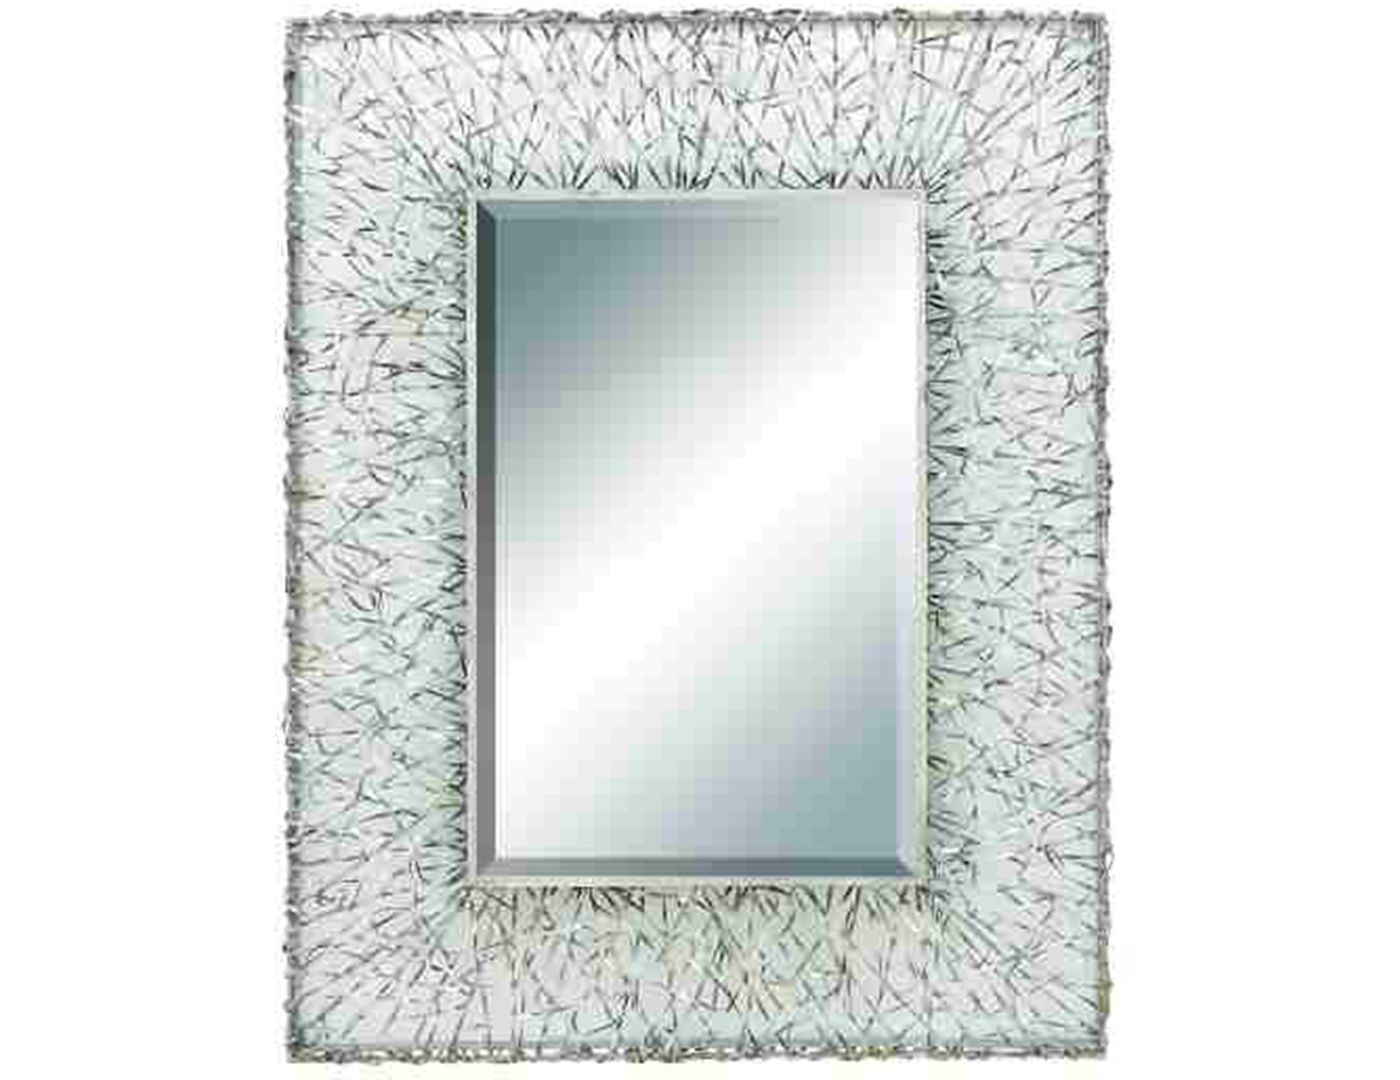 Woven Metal Mirror 32"w X 42"h | Steinhafels In Woven Bronze Metal Wall Mirrors (View 15 of 15)